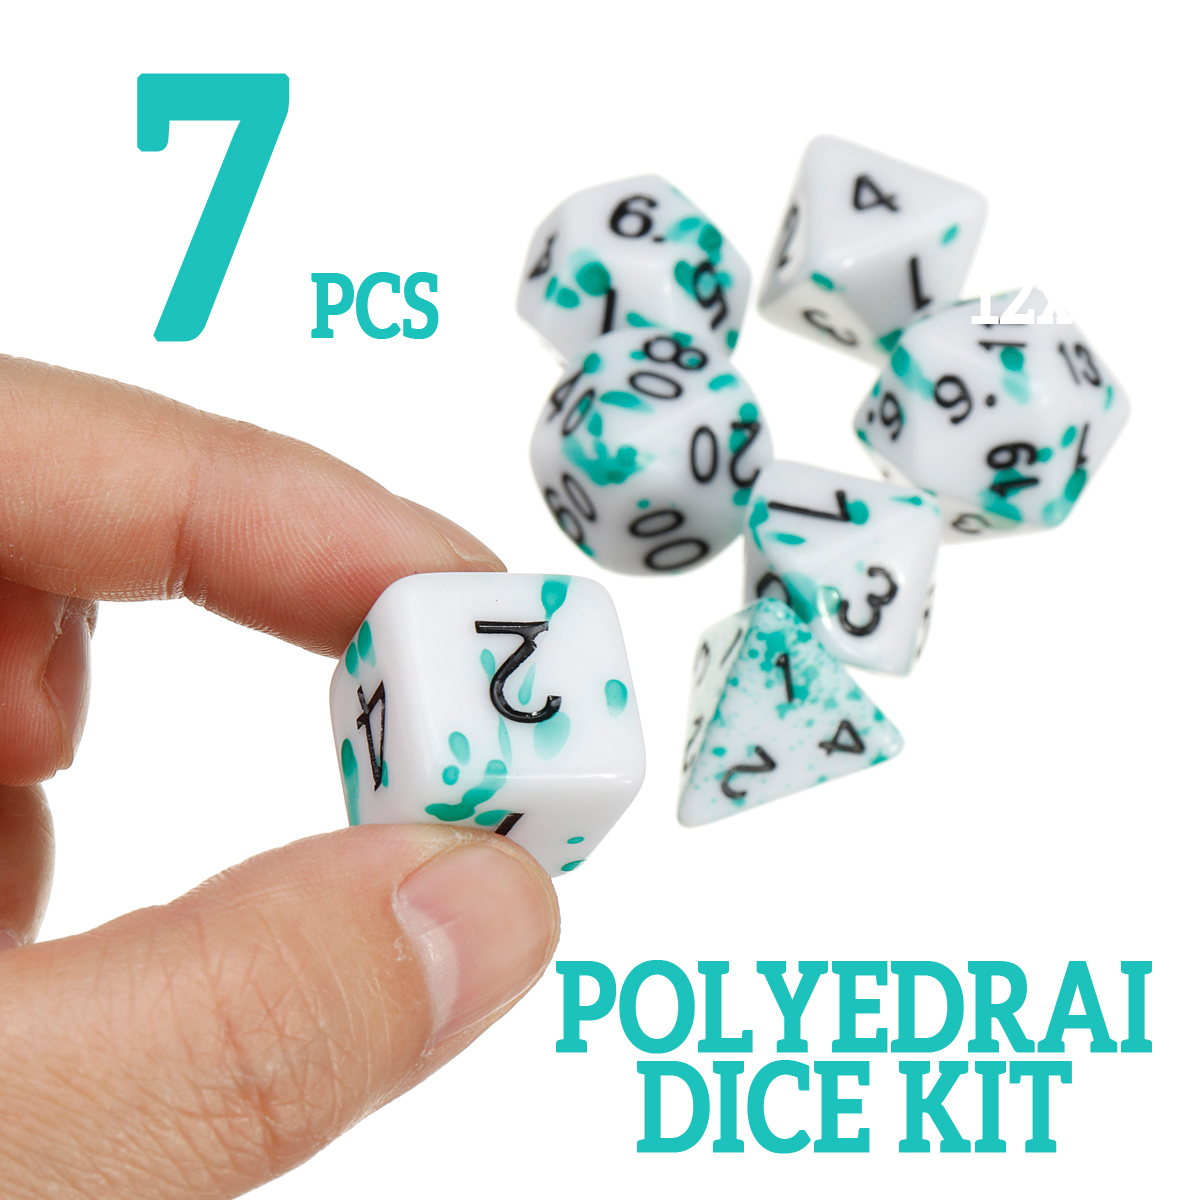 7PCS-Polyhedral-Dices-Set-For-DND-Dungeons--Dragons-Dice-Desktop-RPG-Game-1660865-2